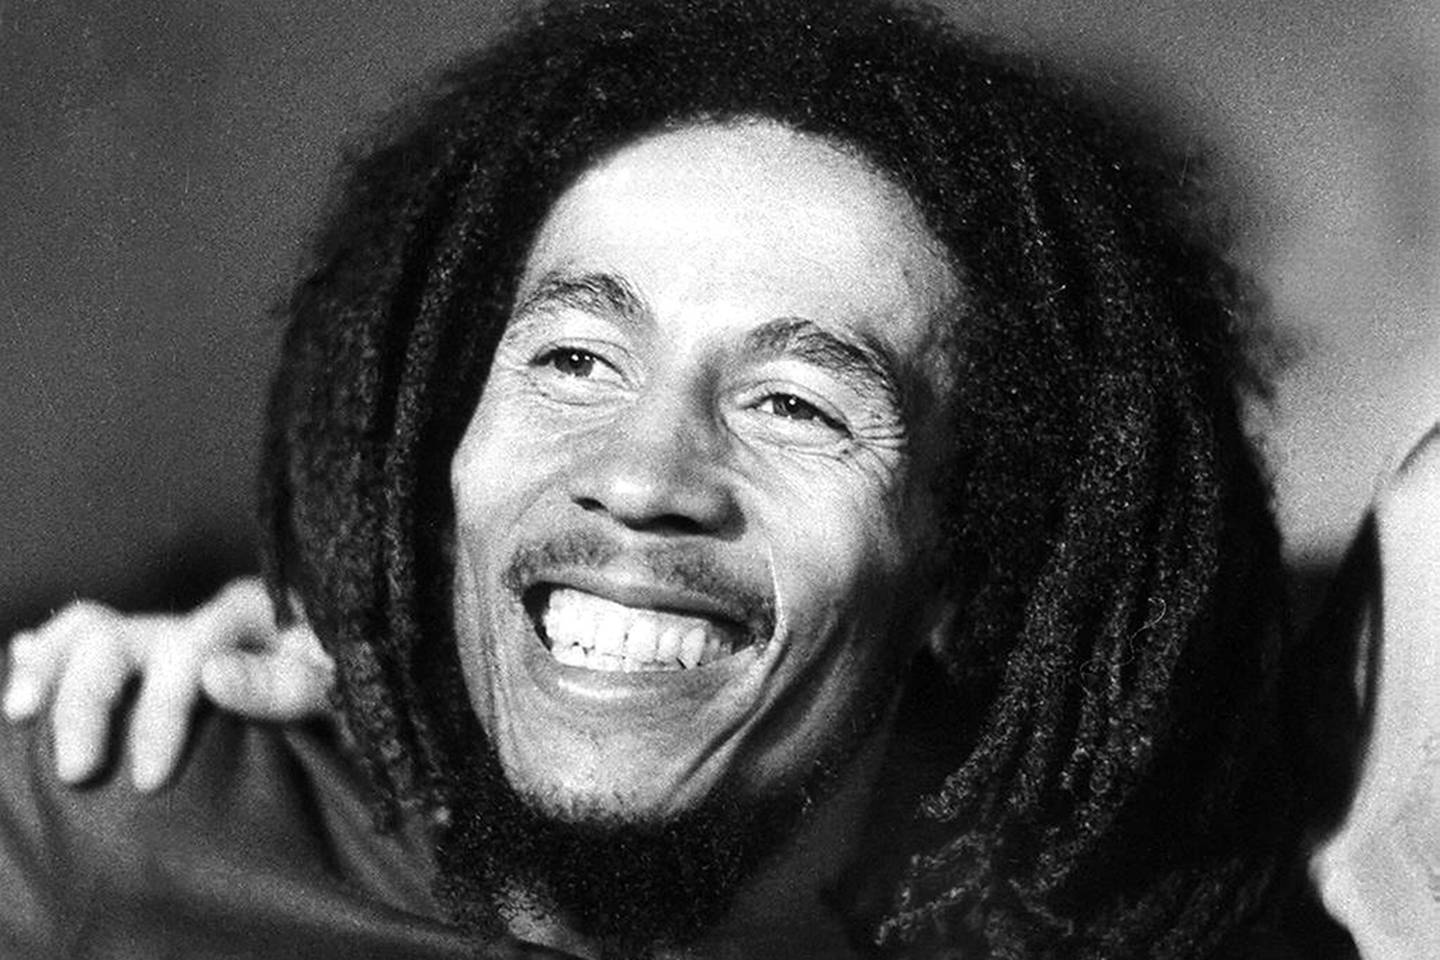  Bob Marley died of cancer in 1981 aged 36. AFP